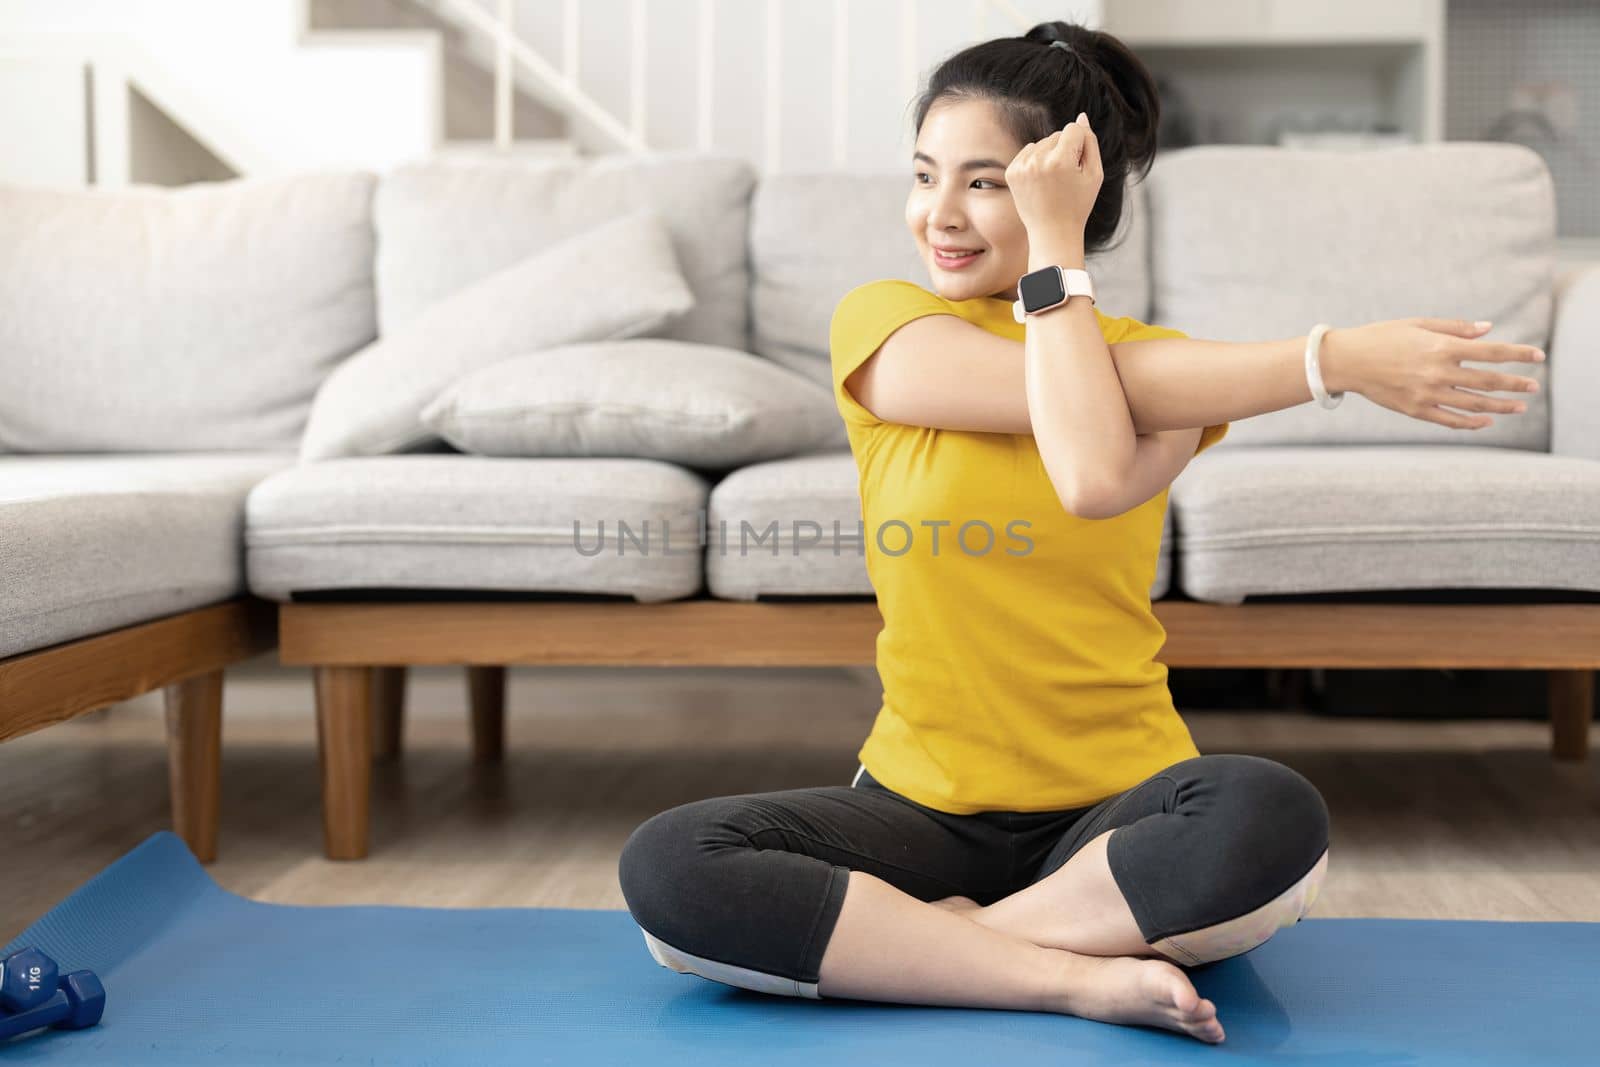 Attractive young woman doing yoga stretching yoga online at home. Self-isolation is beneficial, entertainment and education on the Internet. Healthy lifestyle concept.